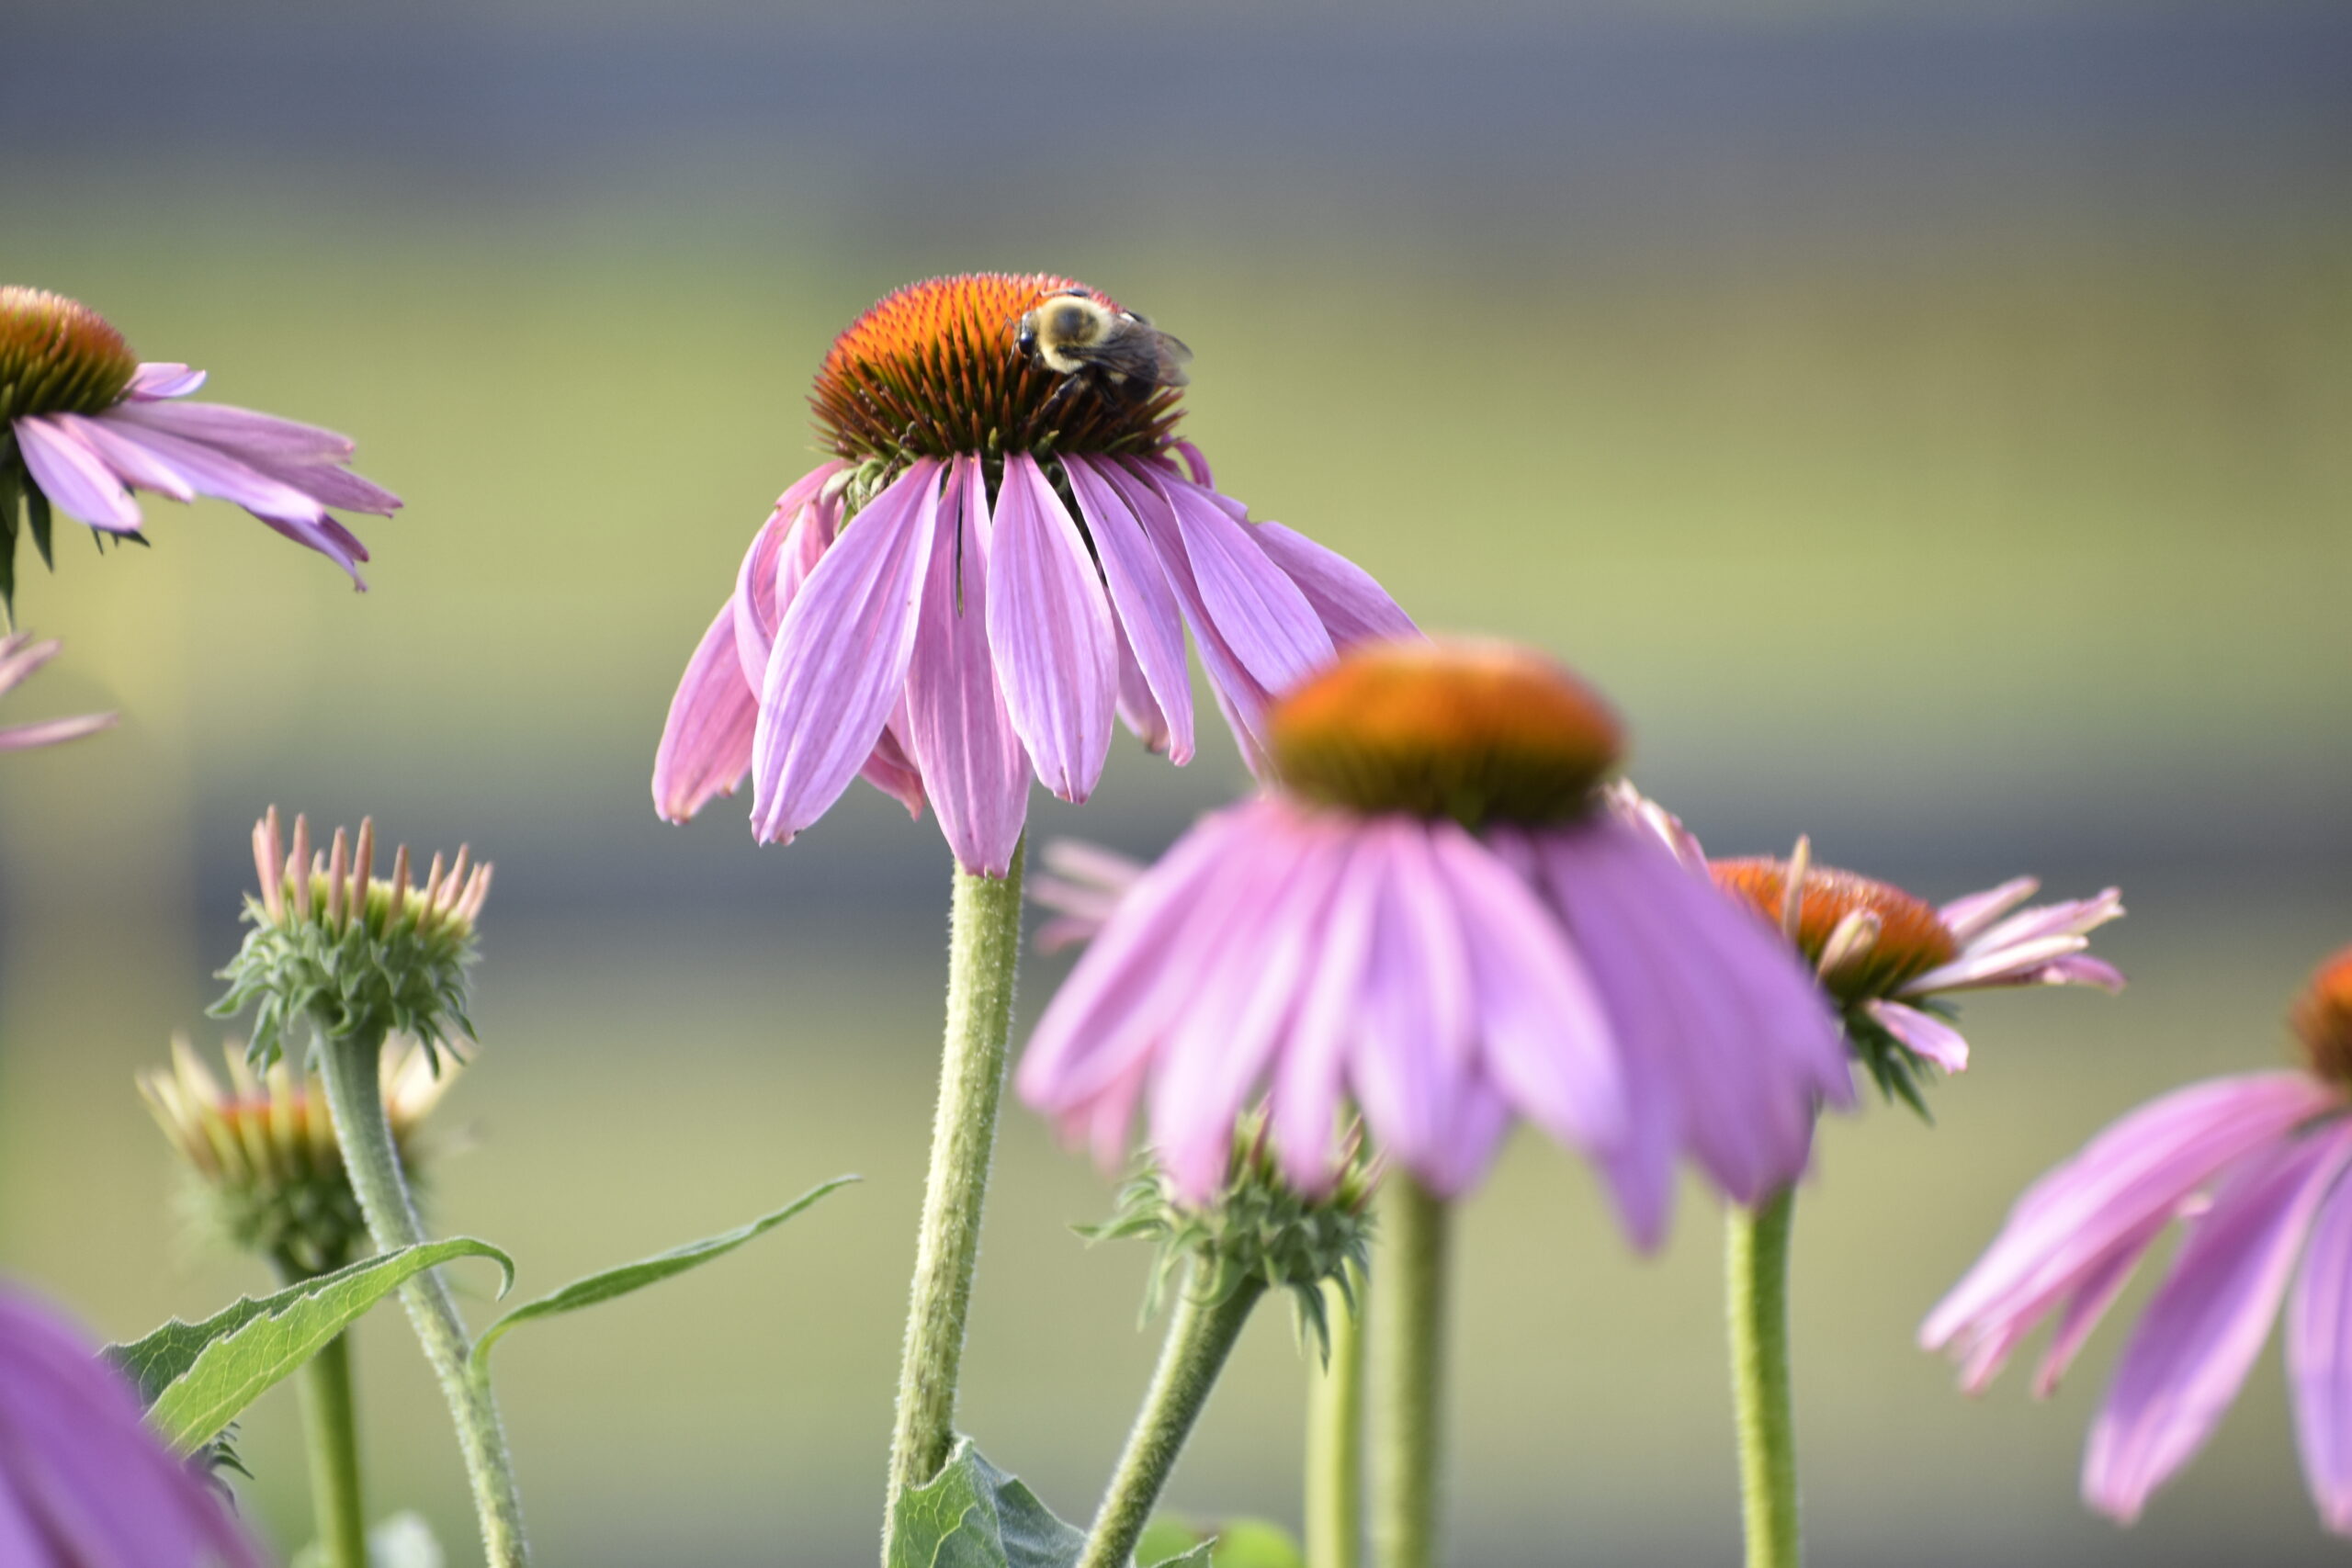 Coneflowers are a popular plants for pollinator gardens -- one of the many gardening topics that will be explored during Spring Gardening School. BRENDAN J. O'REILLY